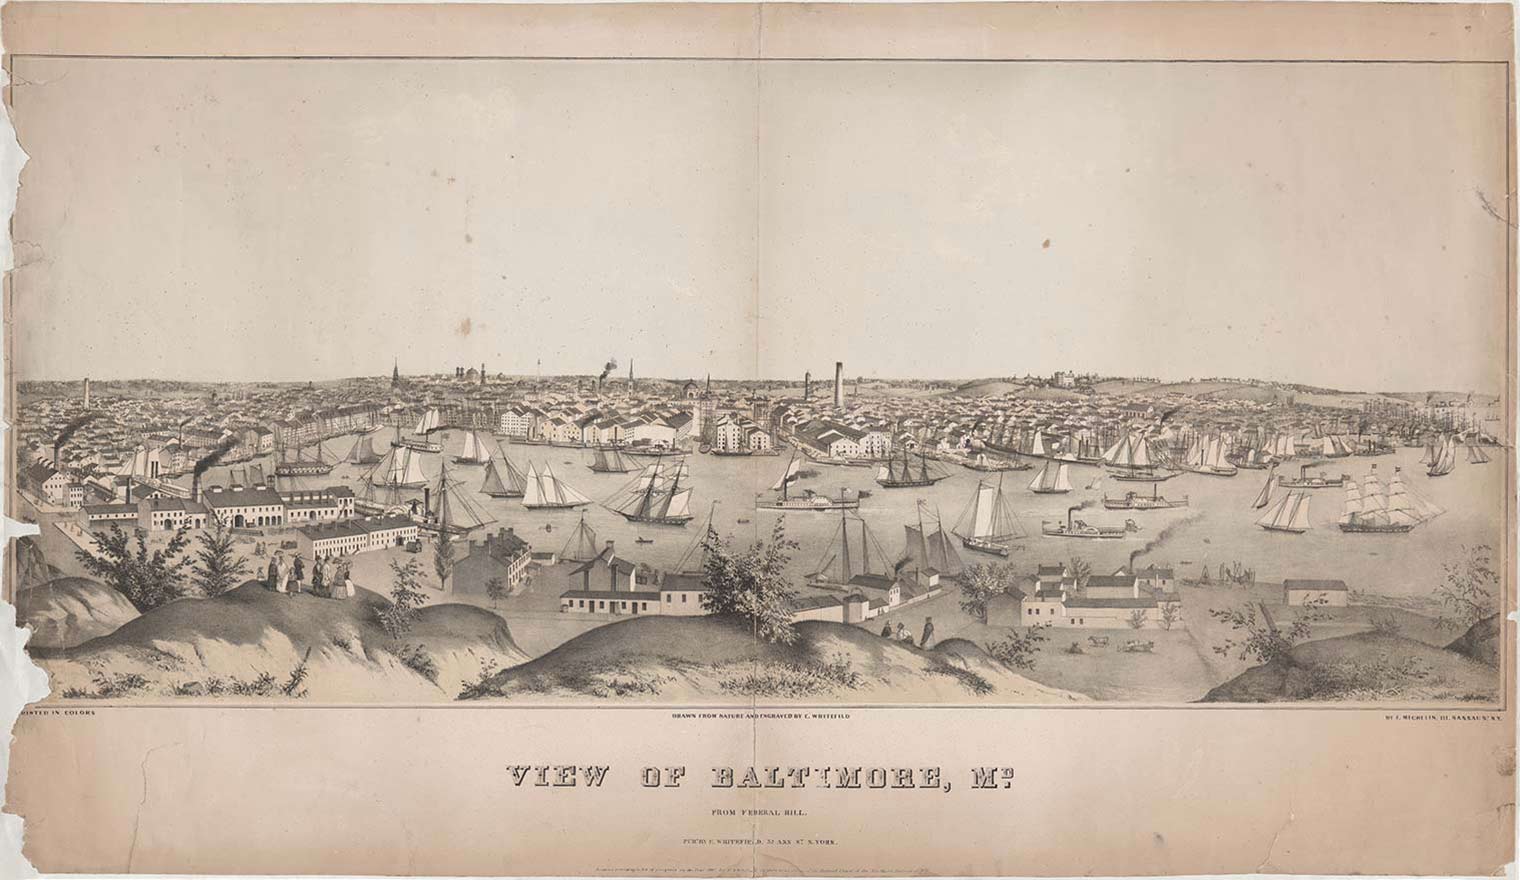 Lithograph of a mid-19th-century view of the Baltimore harbor with sailboats